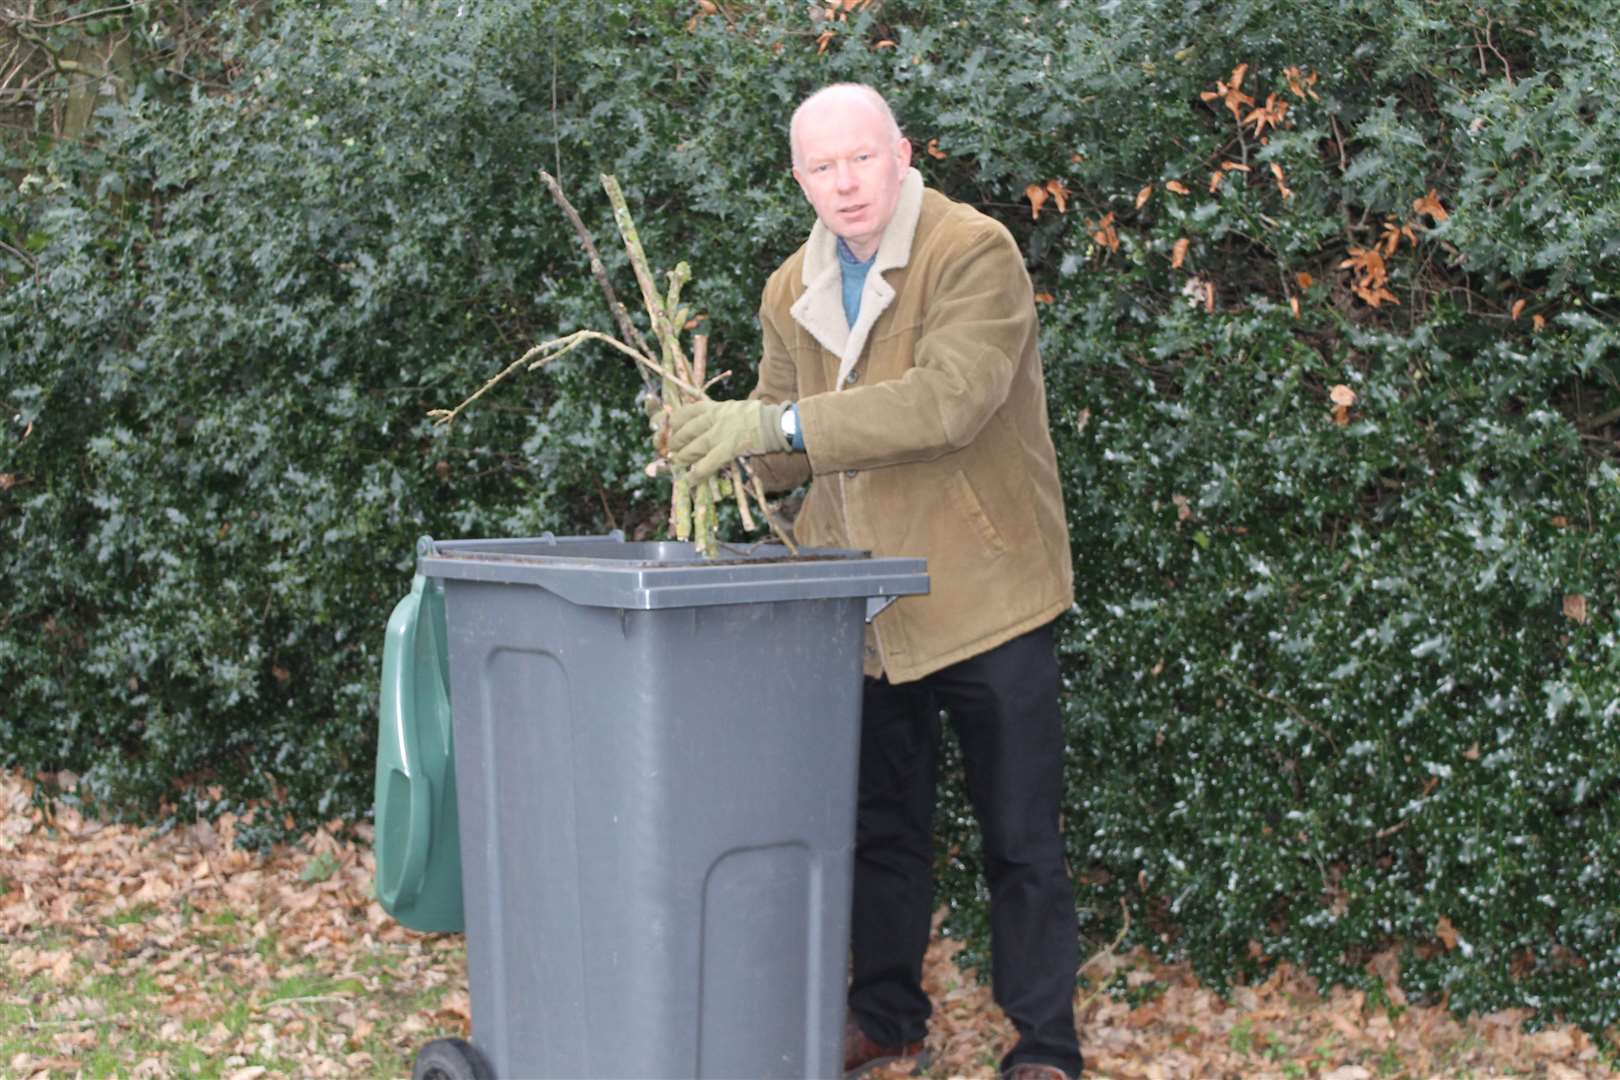 Mike Sole is worried the local authority will start charging to collect garden waste